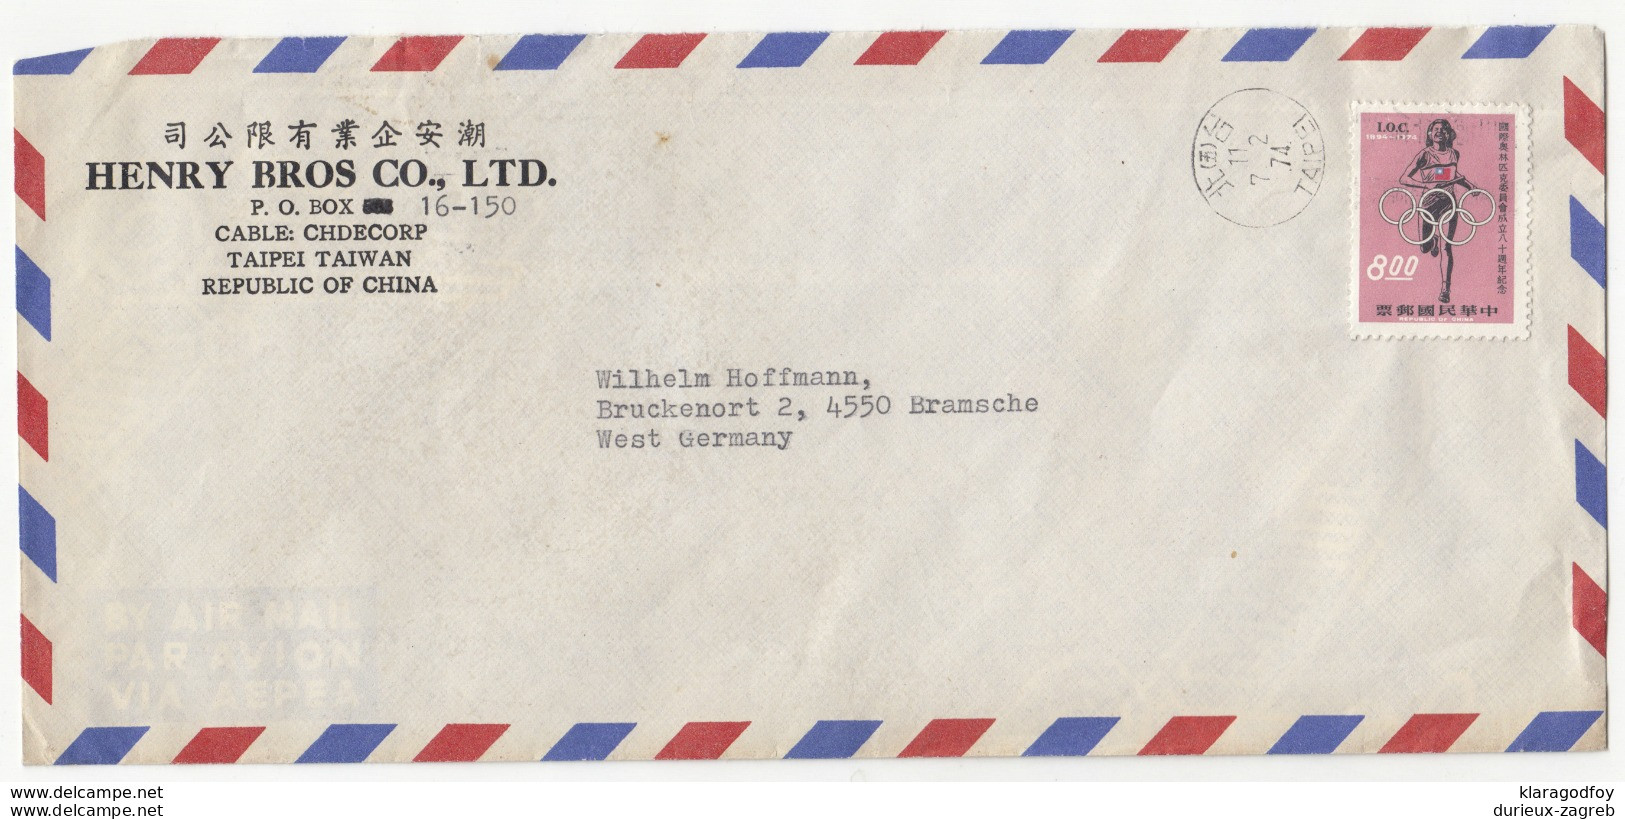 Henry Bros Co. Taipei Company Air Mail Letter Cover Travelled 1974 To Germany  B190920 - Covers & Documents